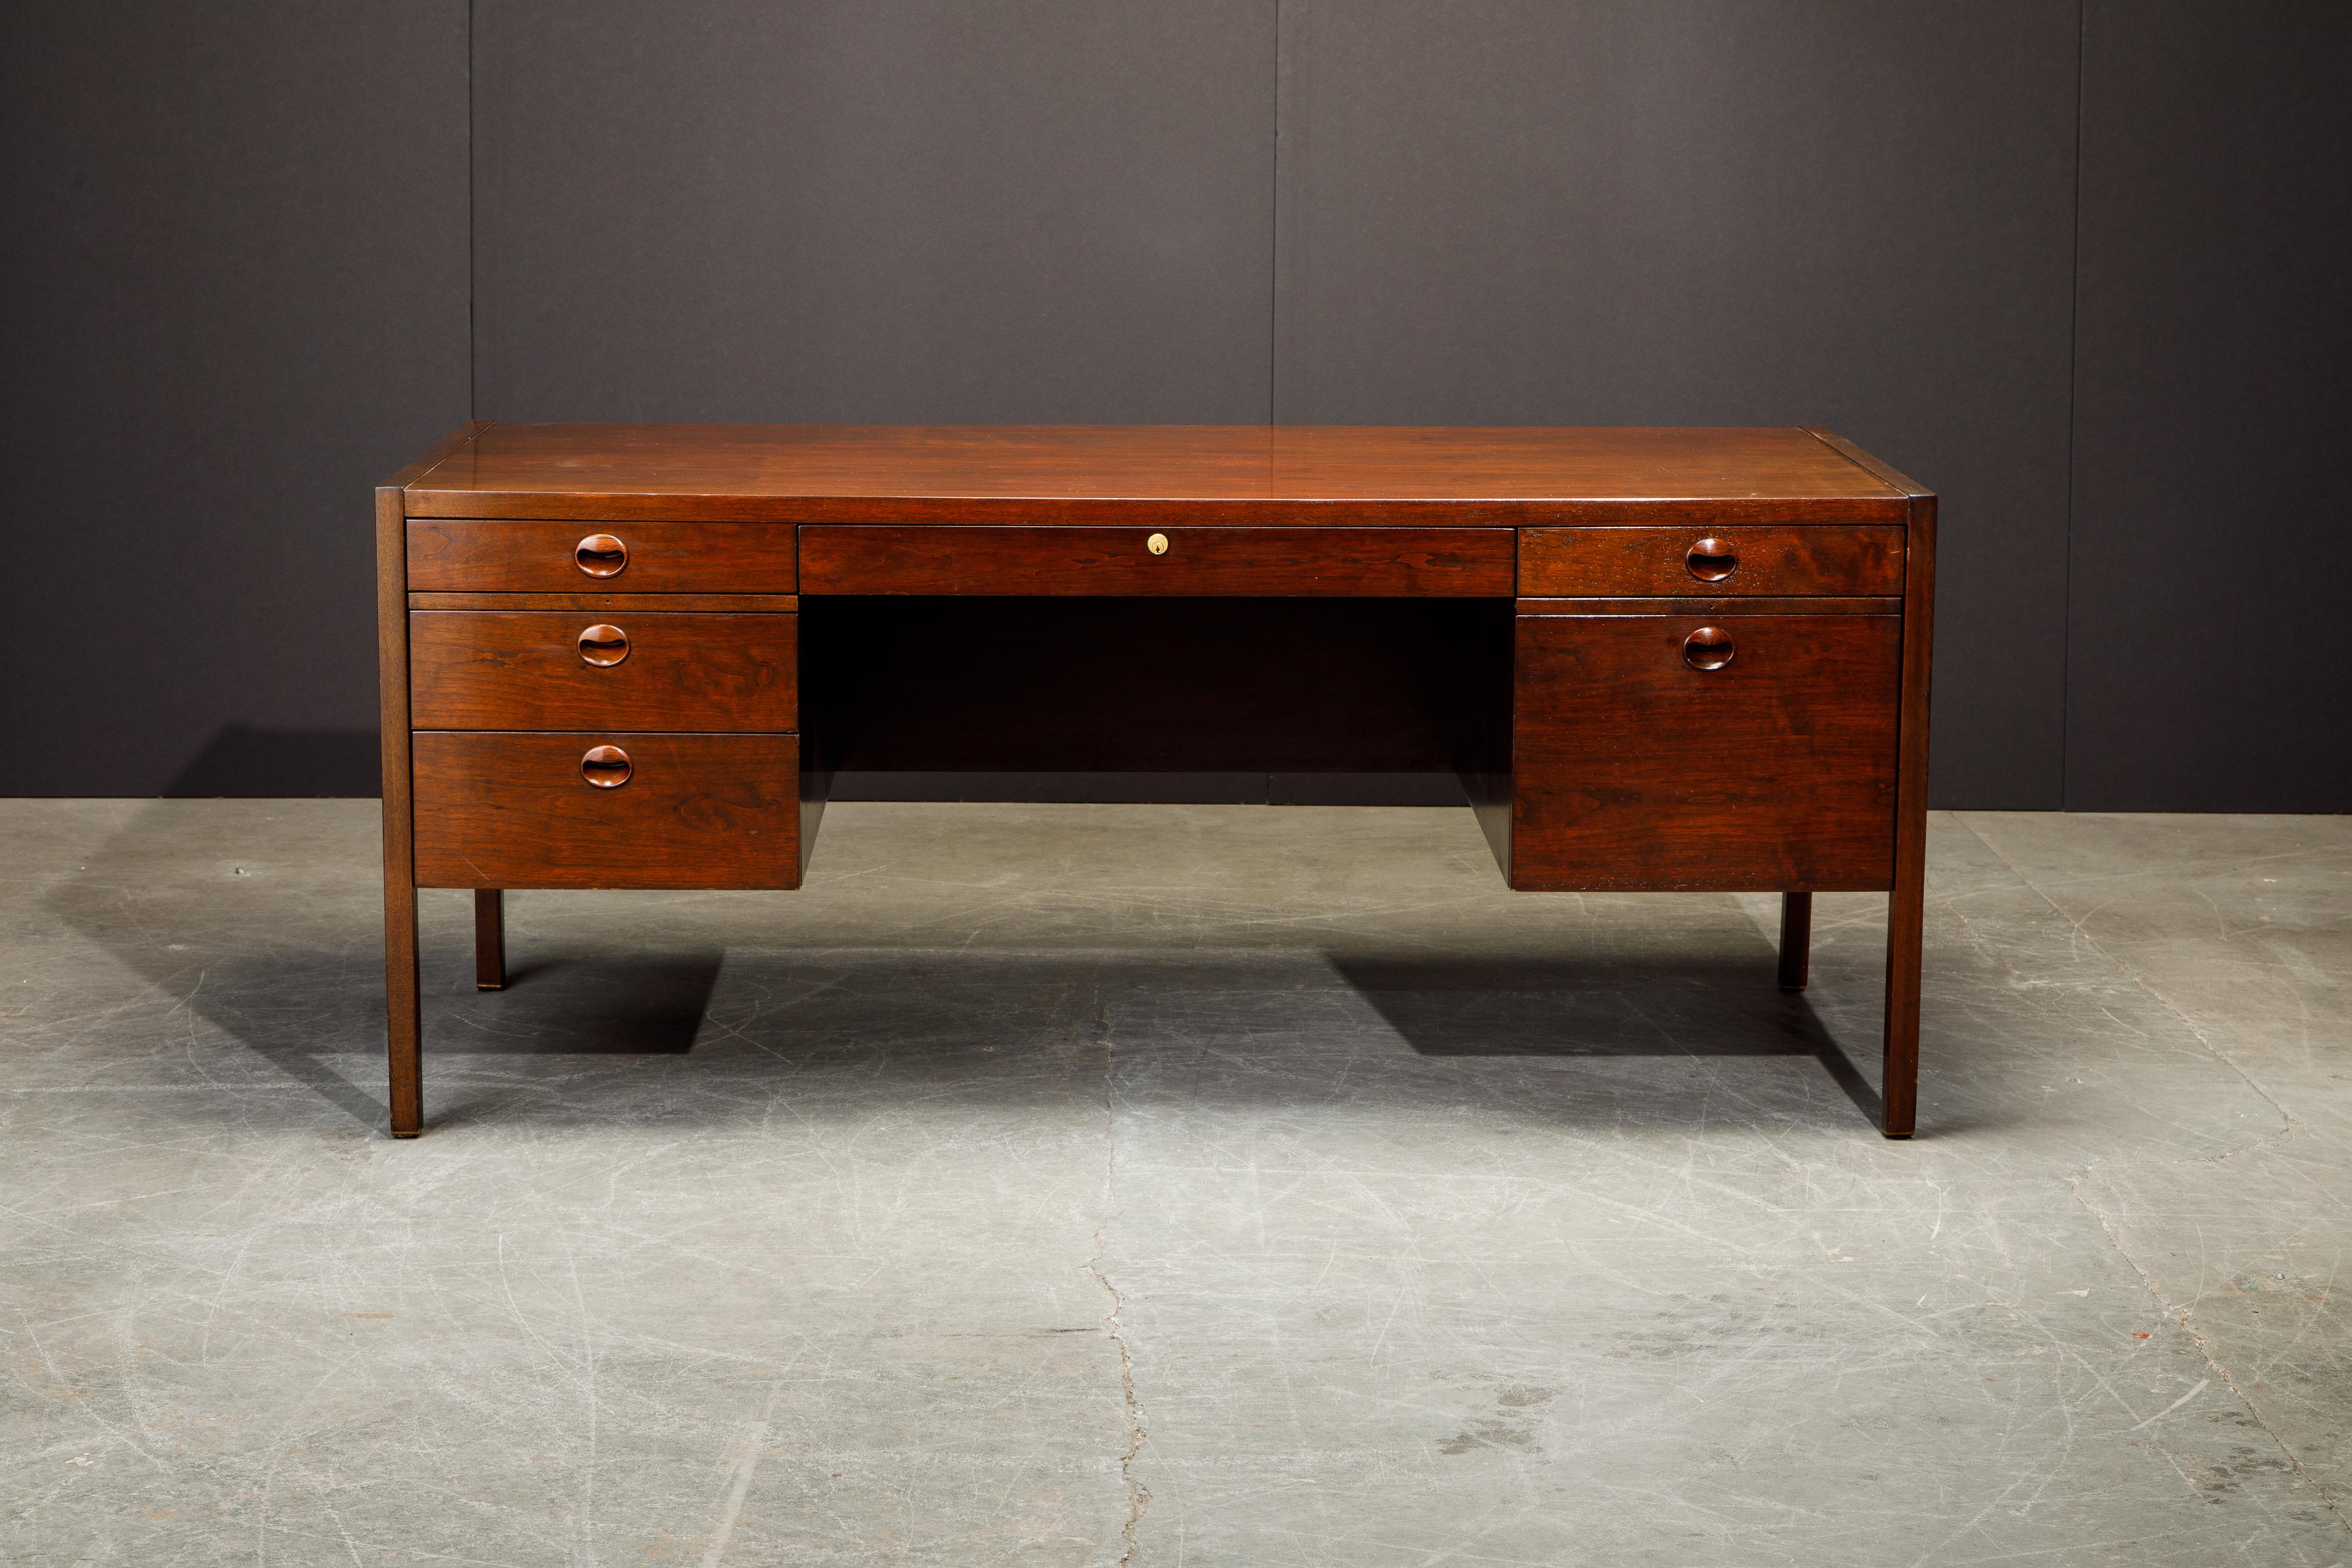 Mid-Century Modern Rosewood and Mahogany Executive Desk by Edward Wormley for Dunbar, 1963, Signed